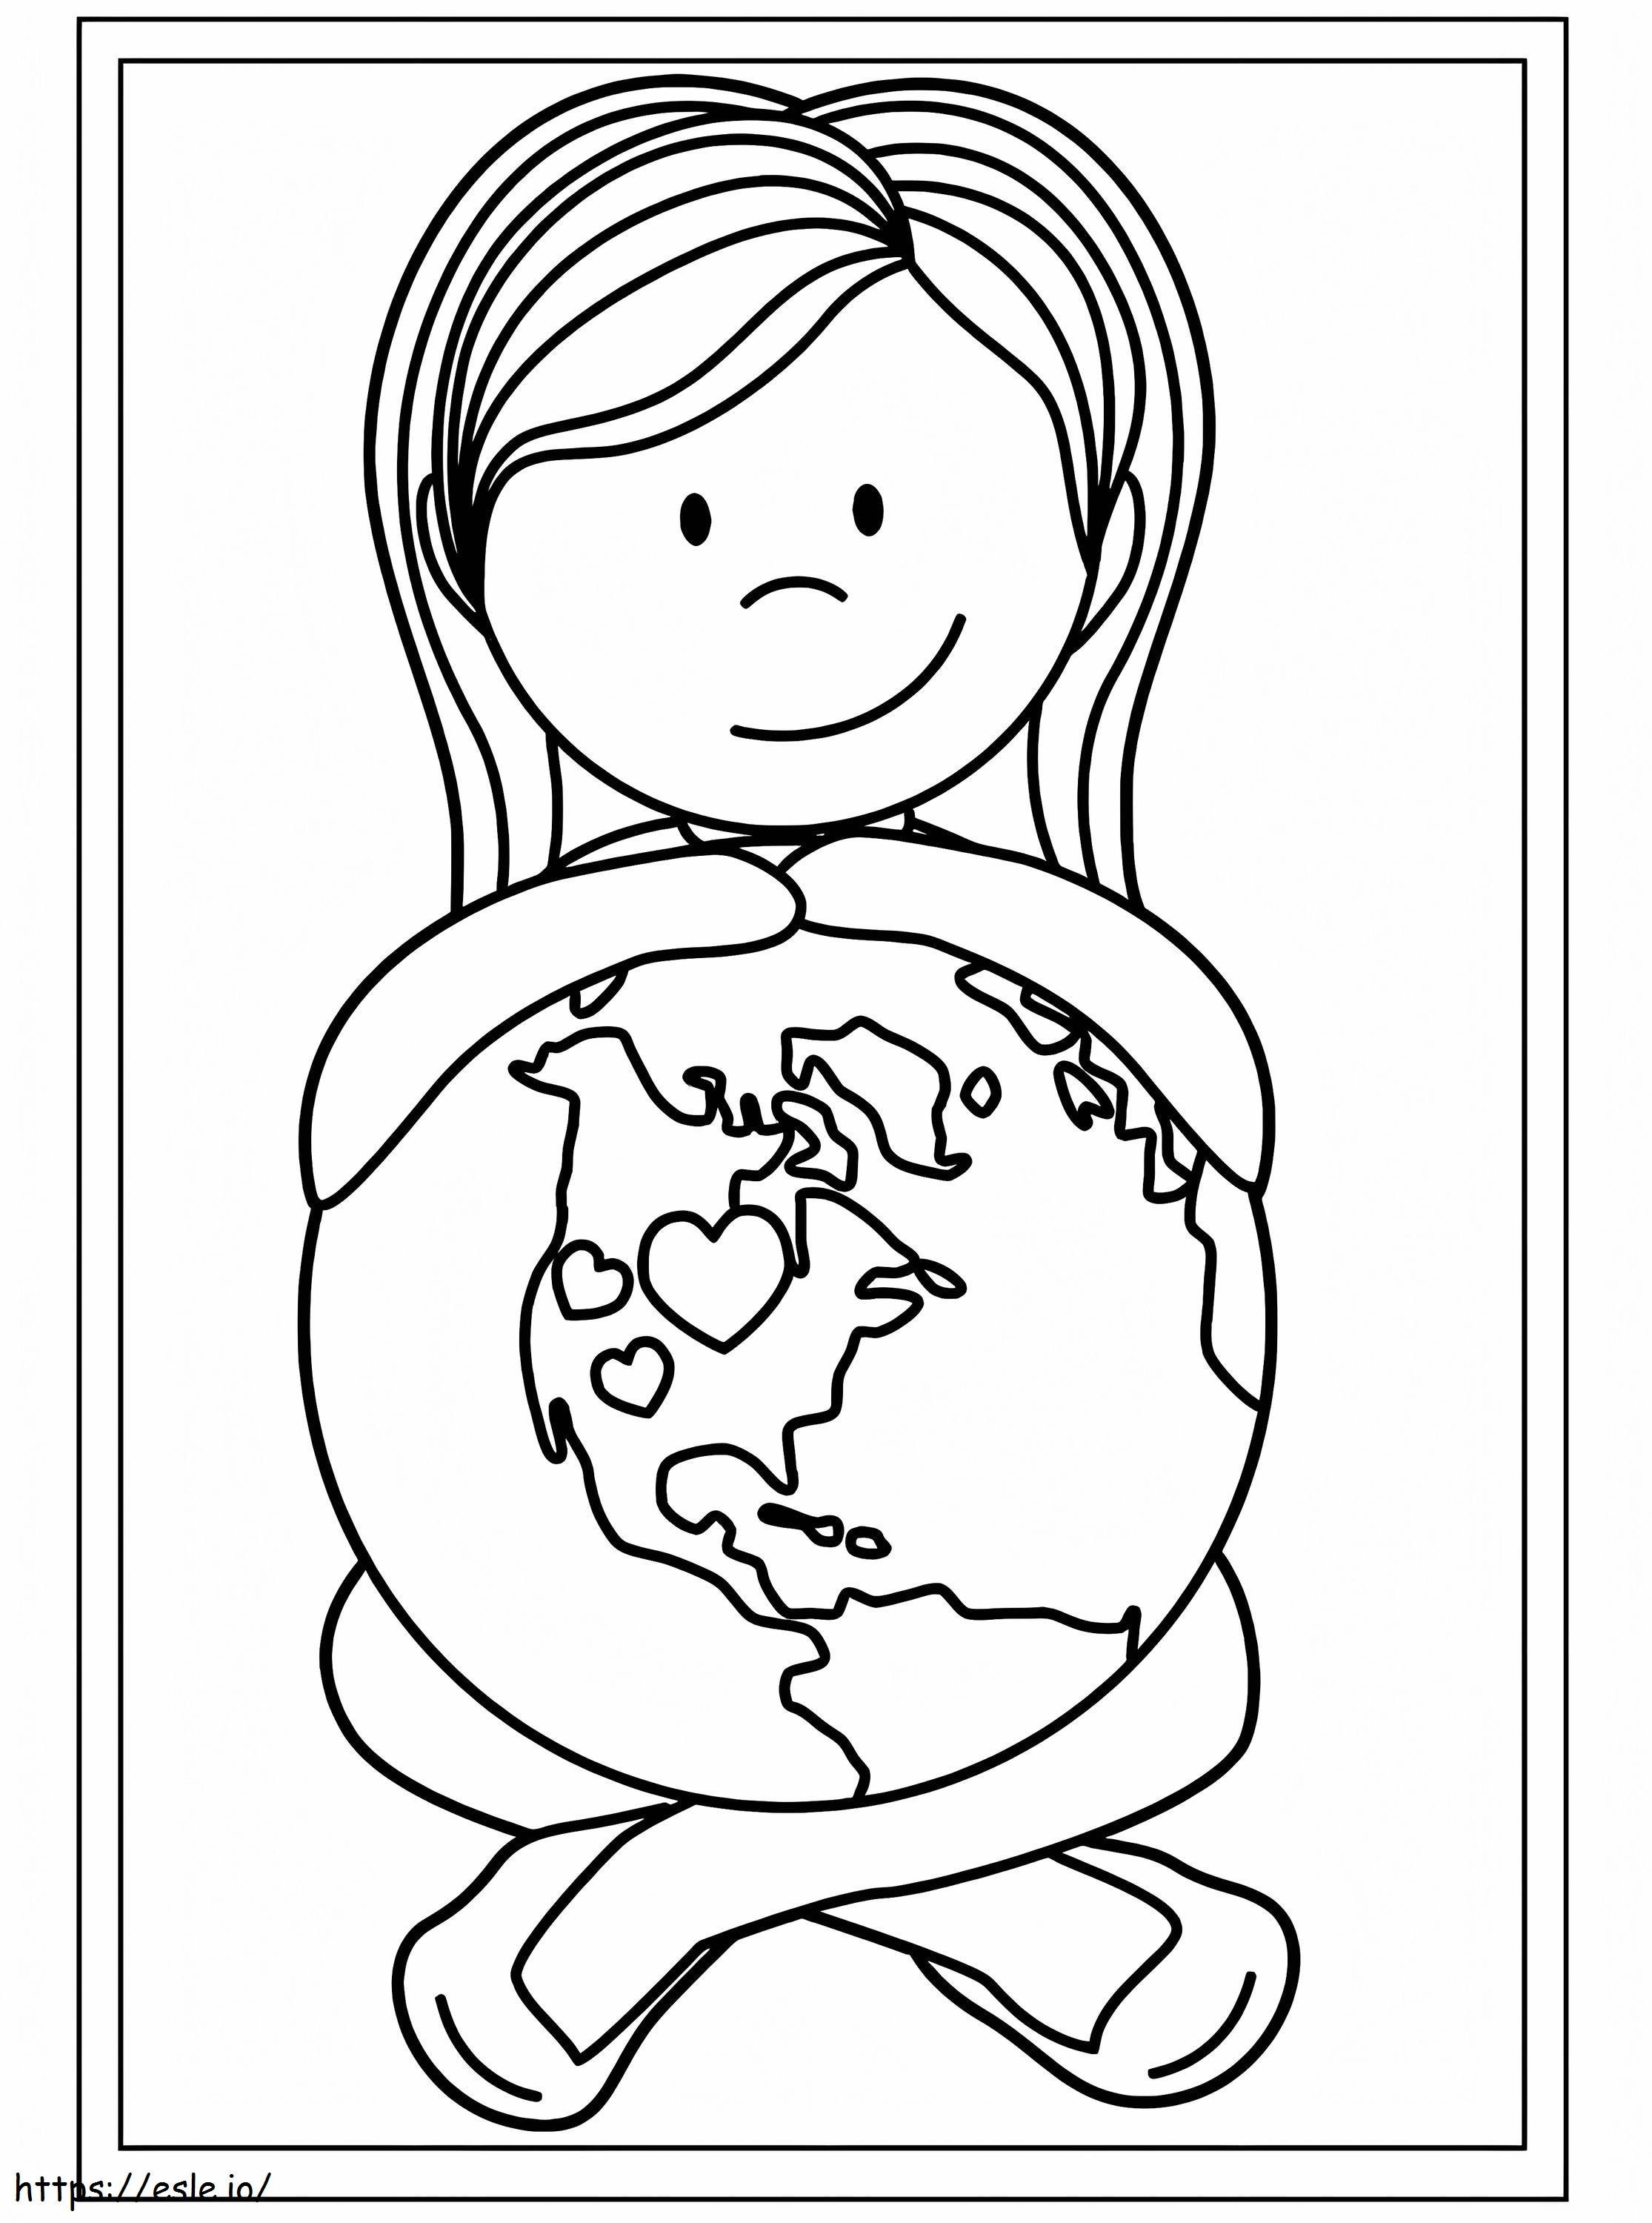 Protect Earth coloring page